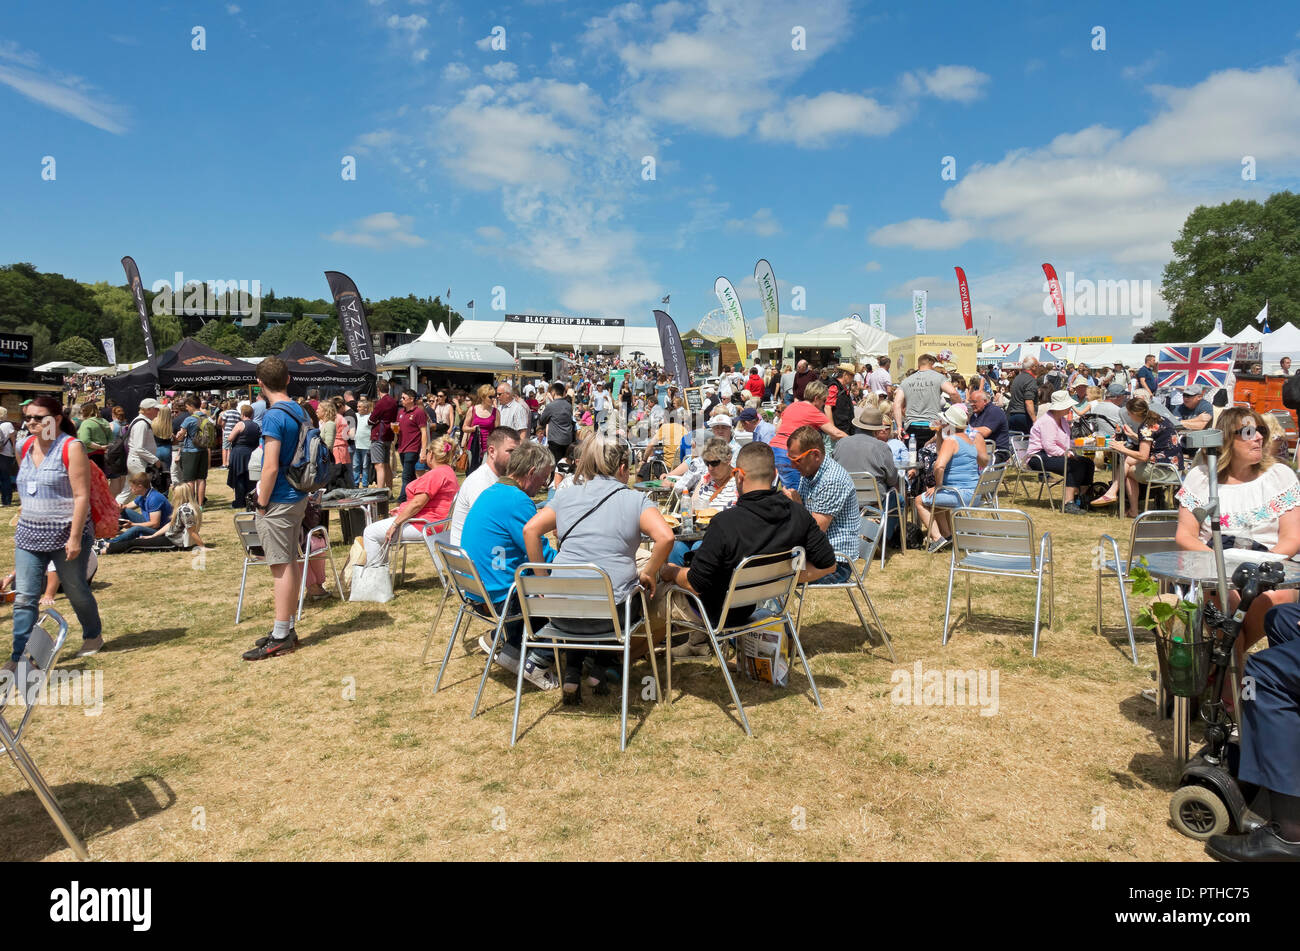 People eating and sitting sat outside at the Great Yorkshire Show in summer Harrogate North Yorkshire England UK United Kingdom GB Great Britain Stock Photo